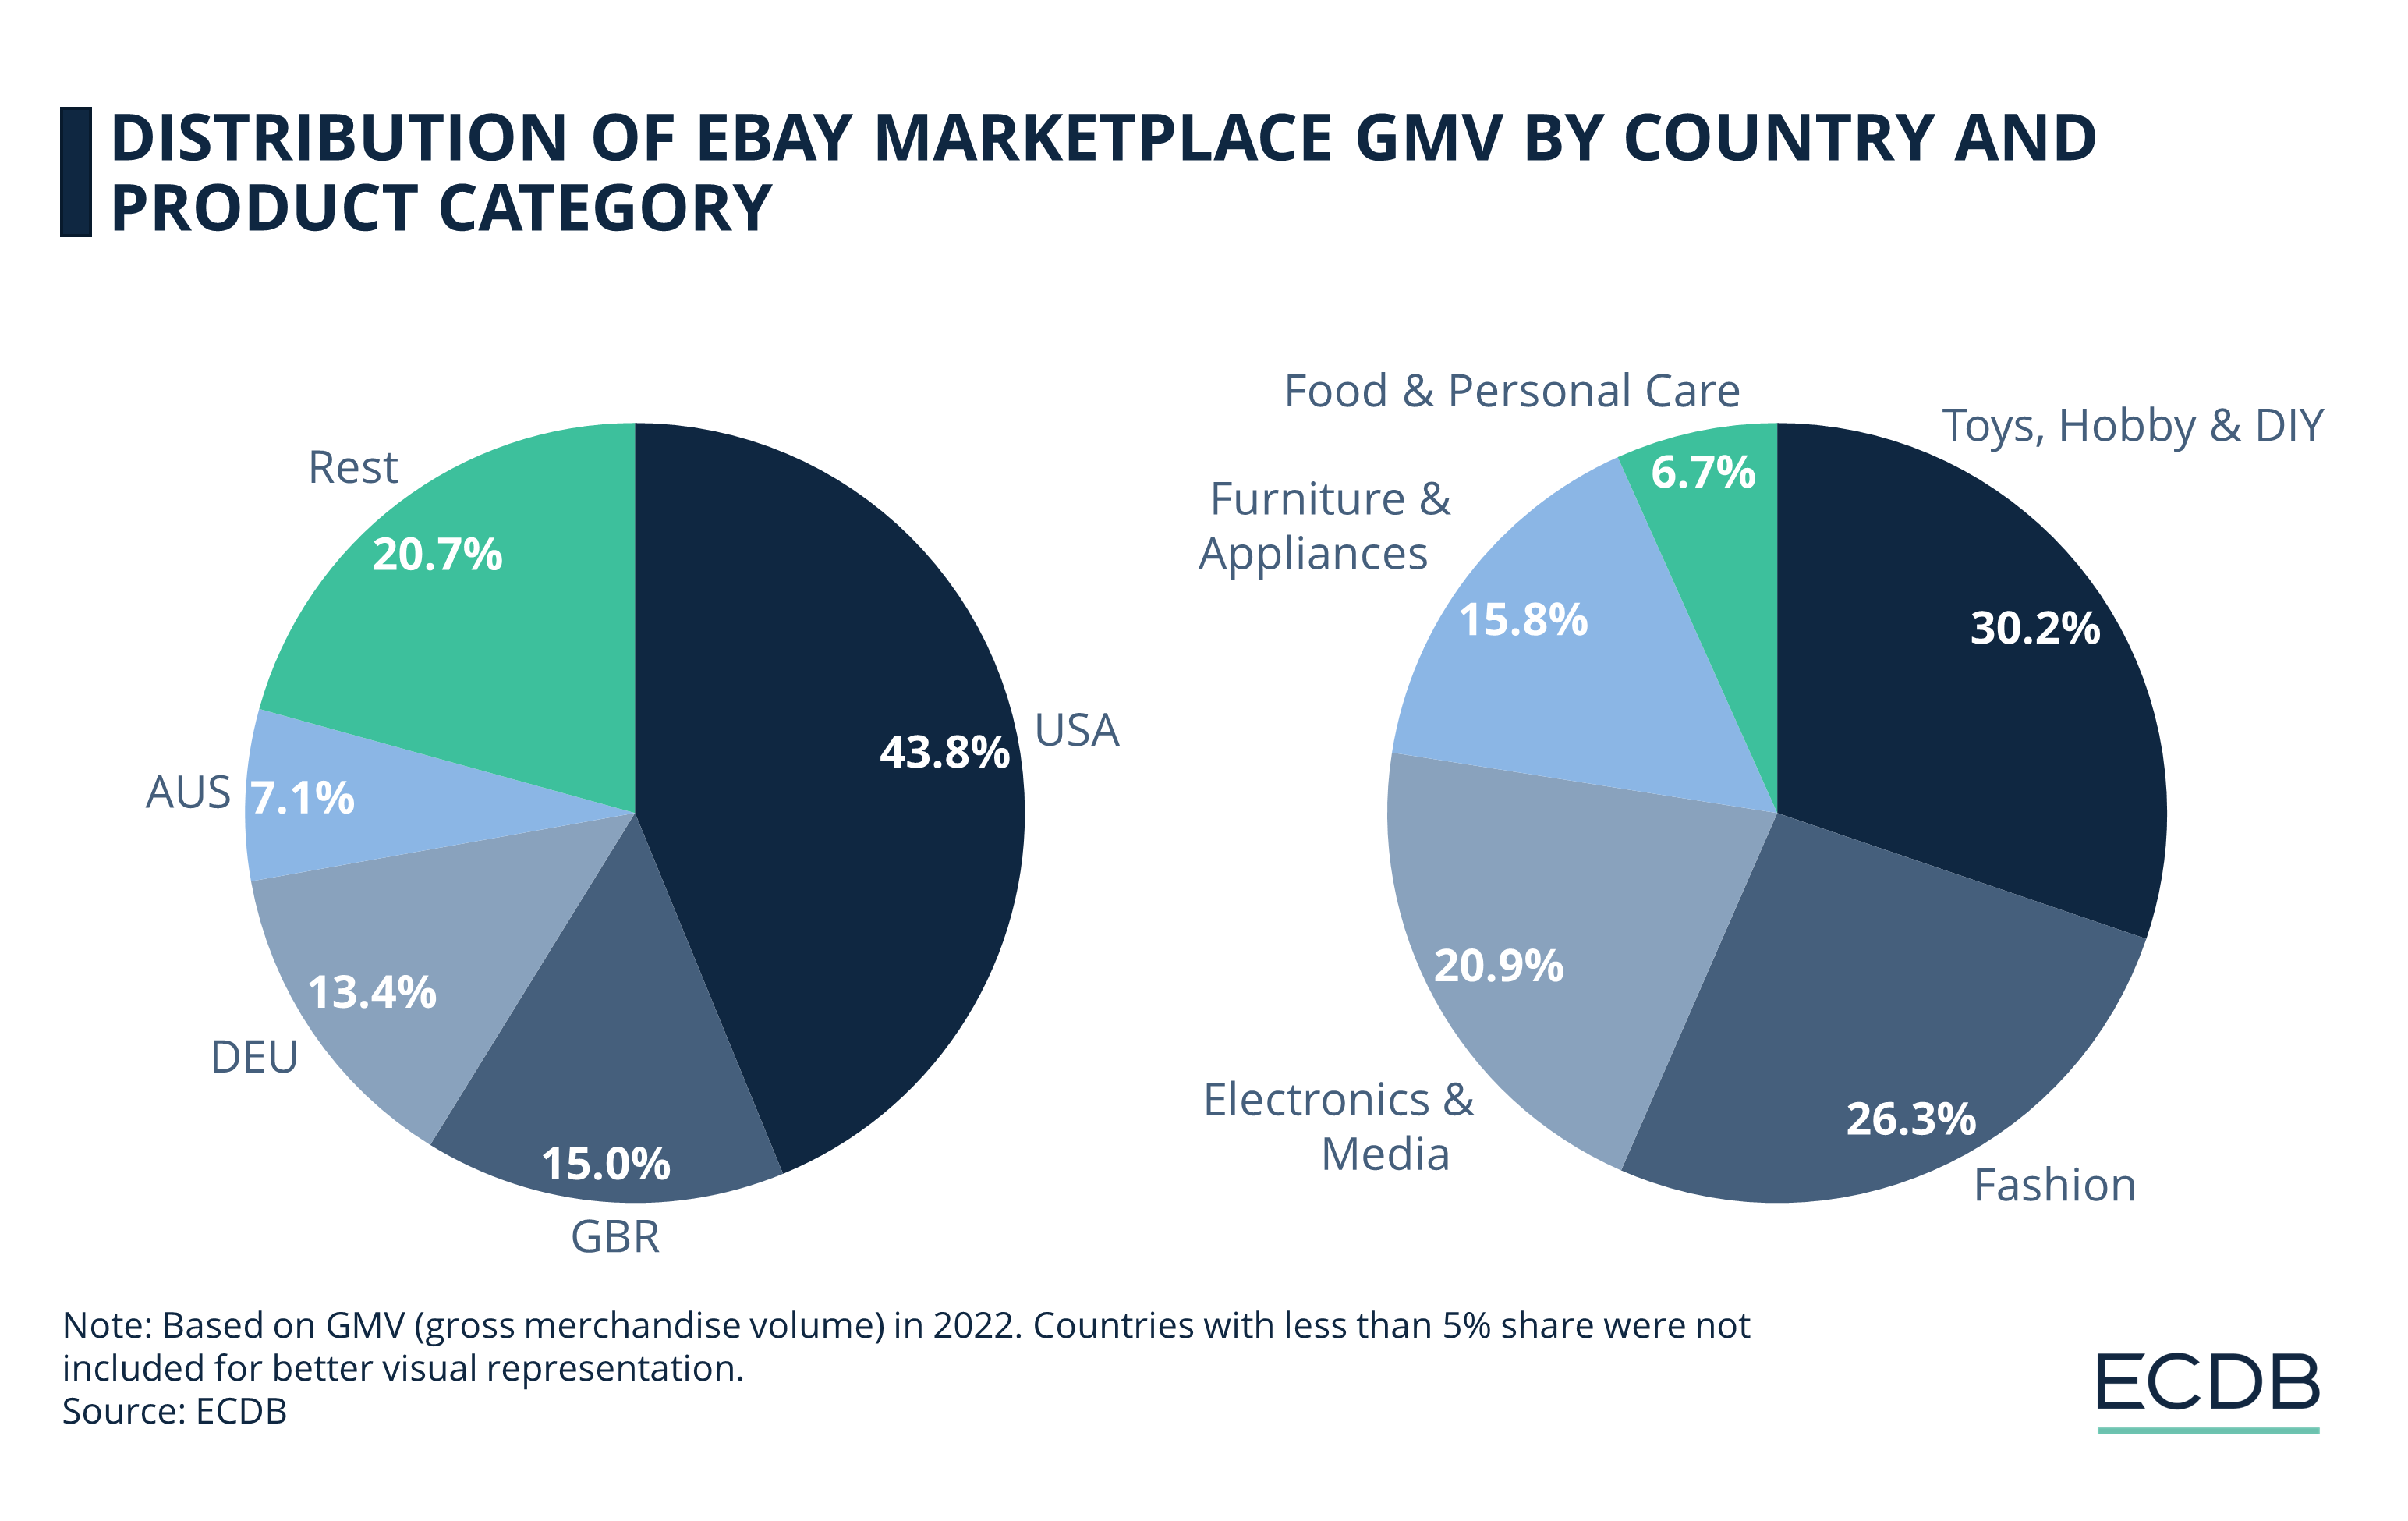 Distribution of eBay Marketplace GMV by Country and Product Category